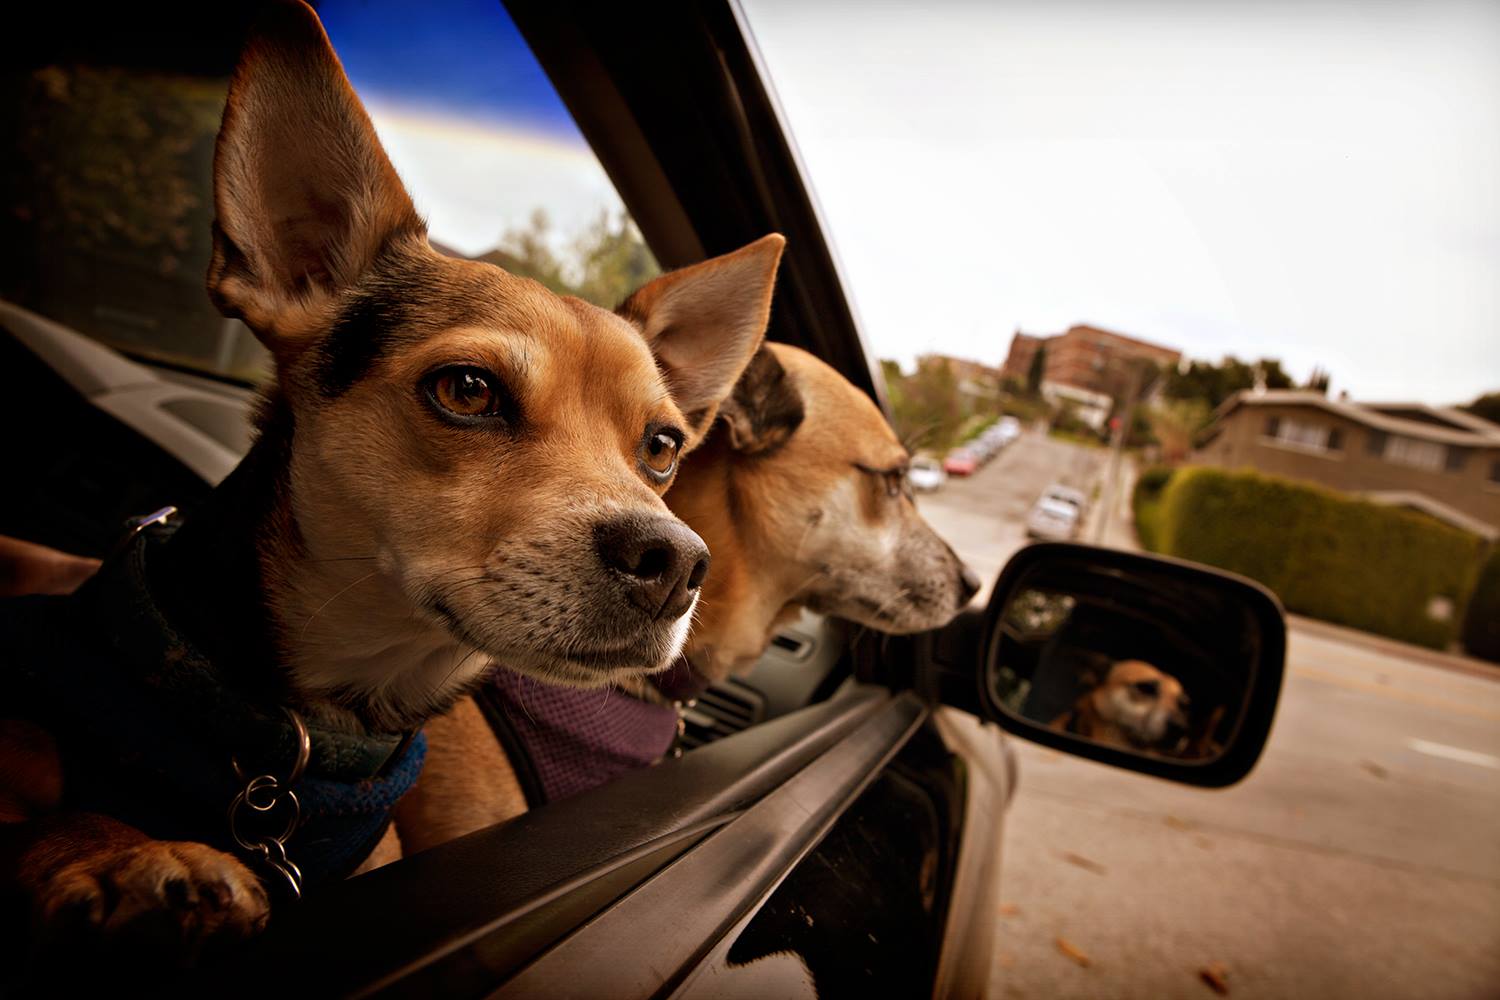 Dogs In Cars